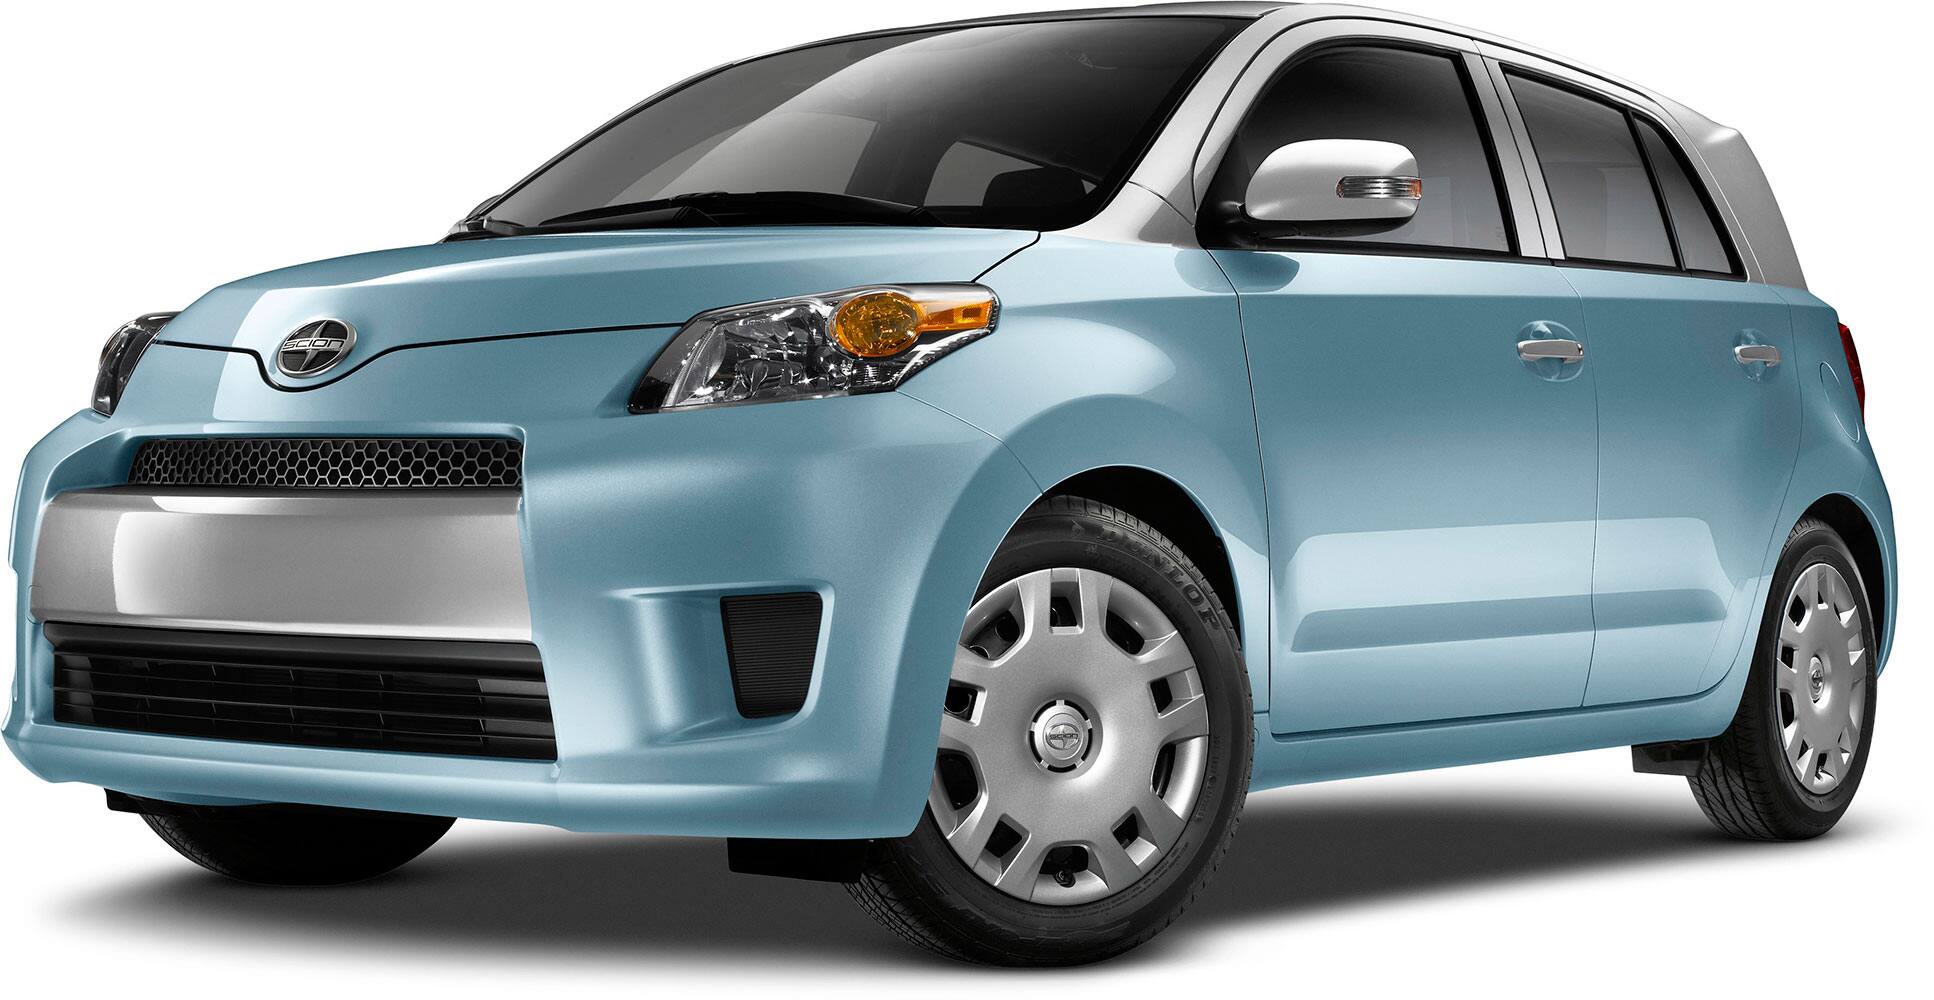 This photo provided by Toyota shows the 2014 Scion xD model. Jeremy Acevedo, an analyst with Edmunds, said women tend toward smaller, easy-to-manuever vehicles like compact and midsize sedans or crossovers, while men tend toward trucks and larger sedans. The tiny Scion xD hatchback has the highest proportion of female buyers, at 57 percent.